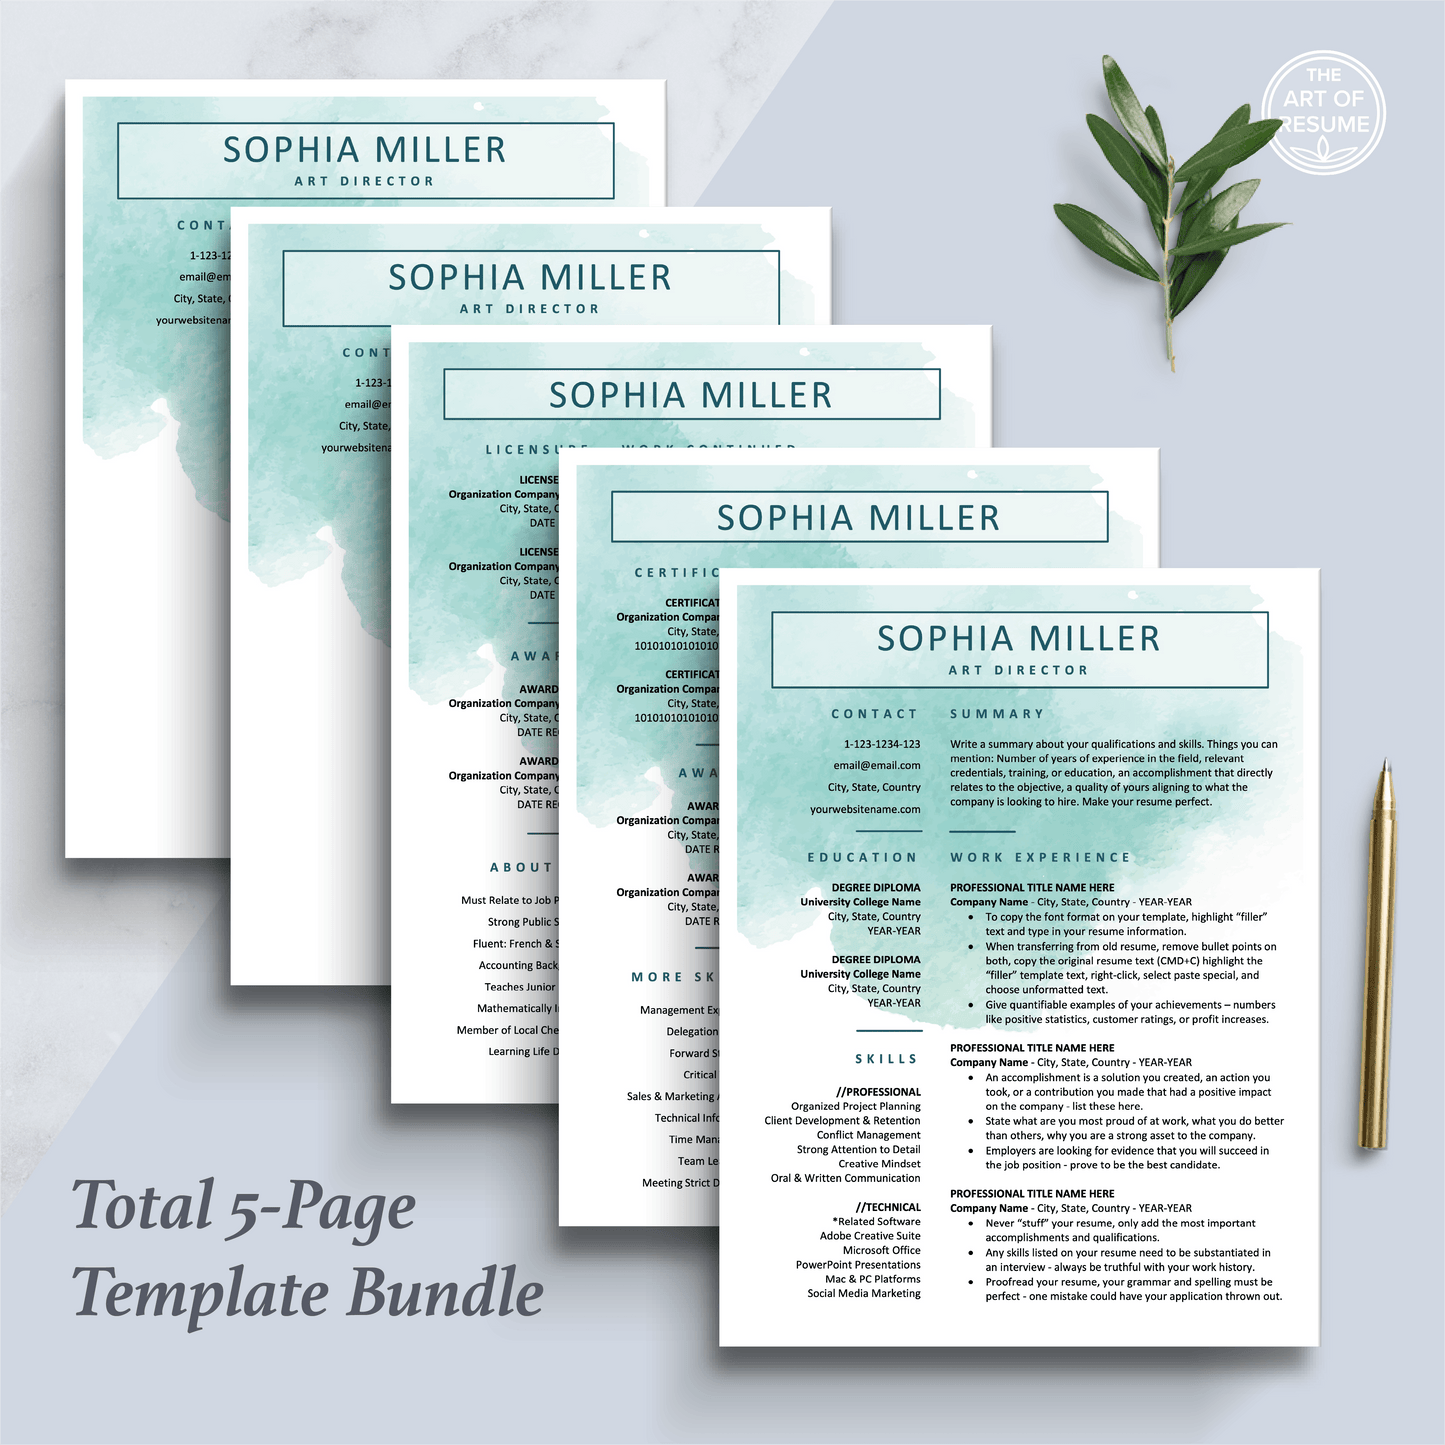 The Art of Resume Templates |  Creative Teal Blue Watercolor Resume CV Design Bundle including matching cover letter and reference page